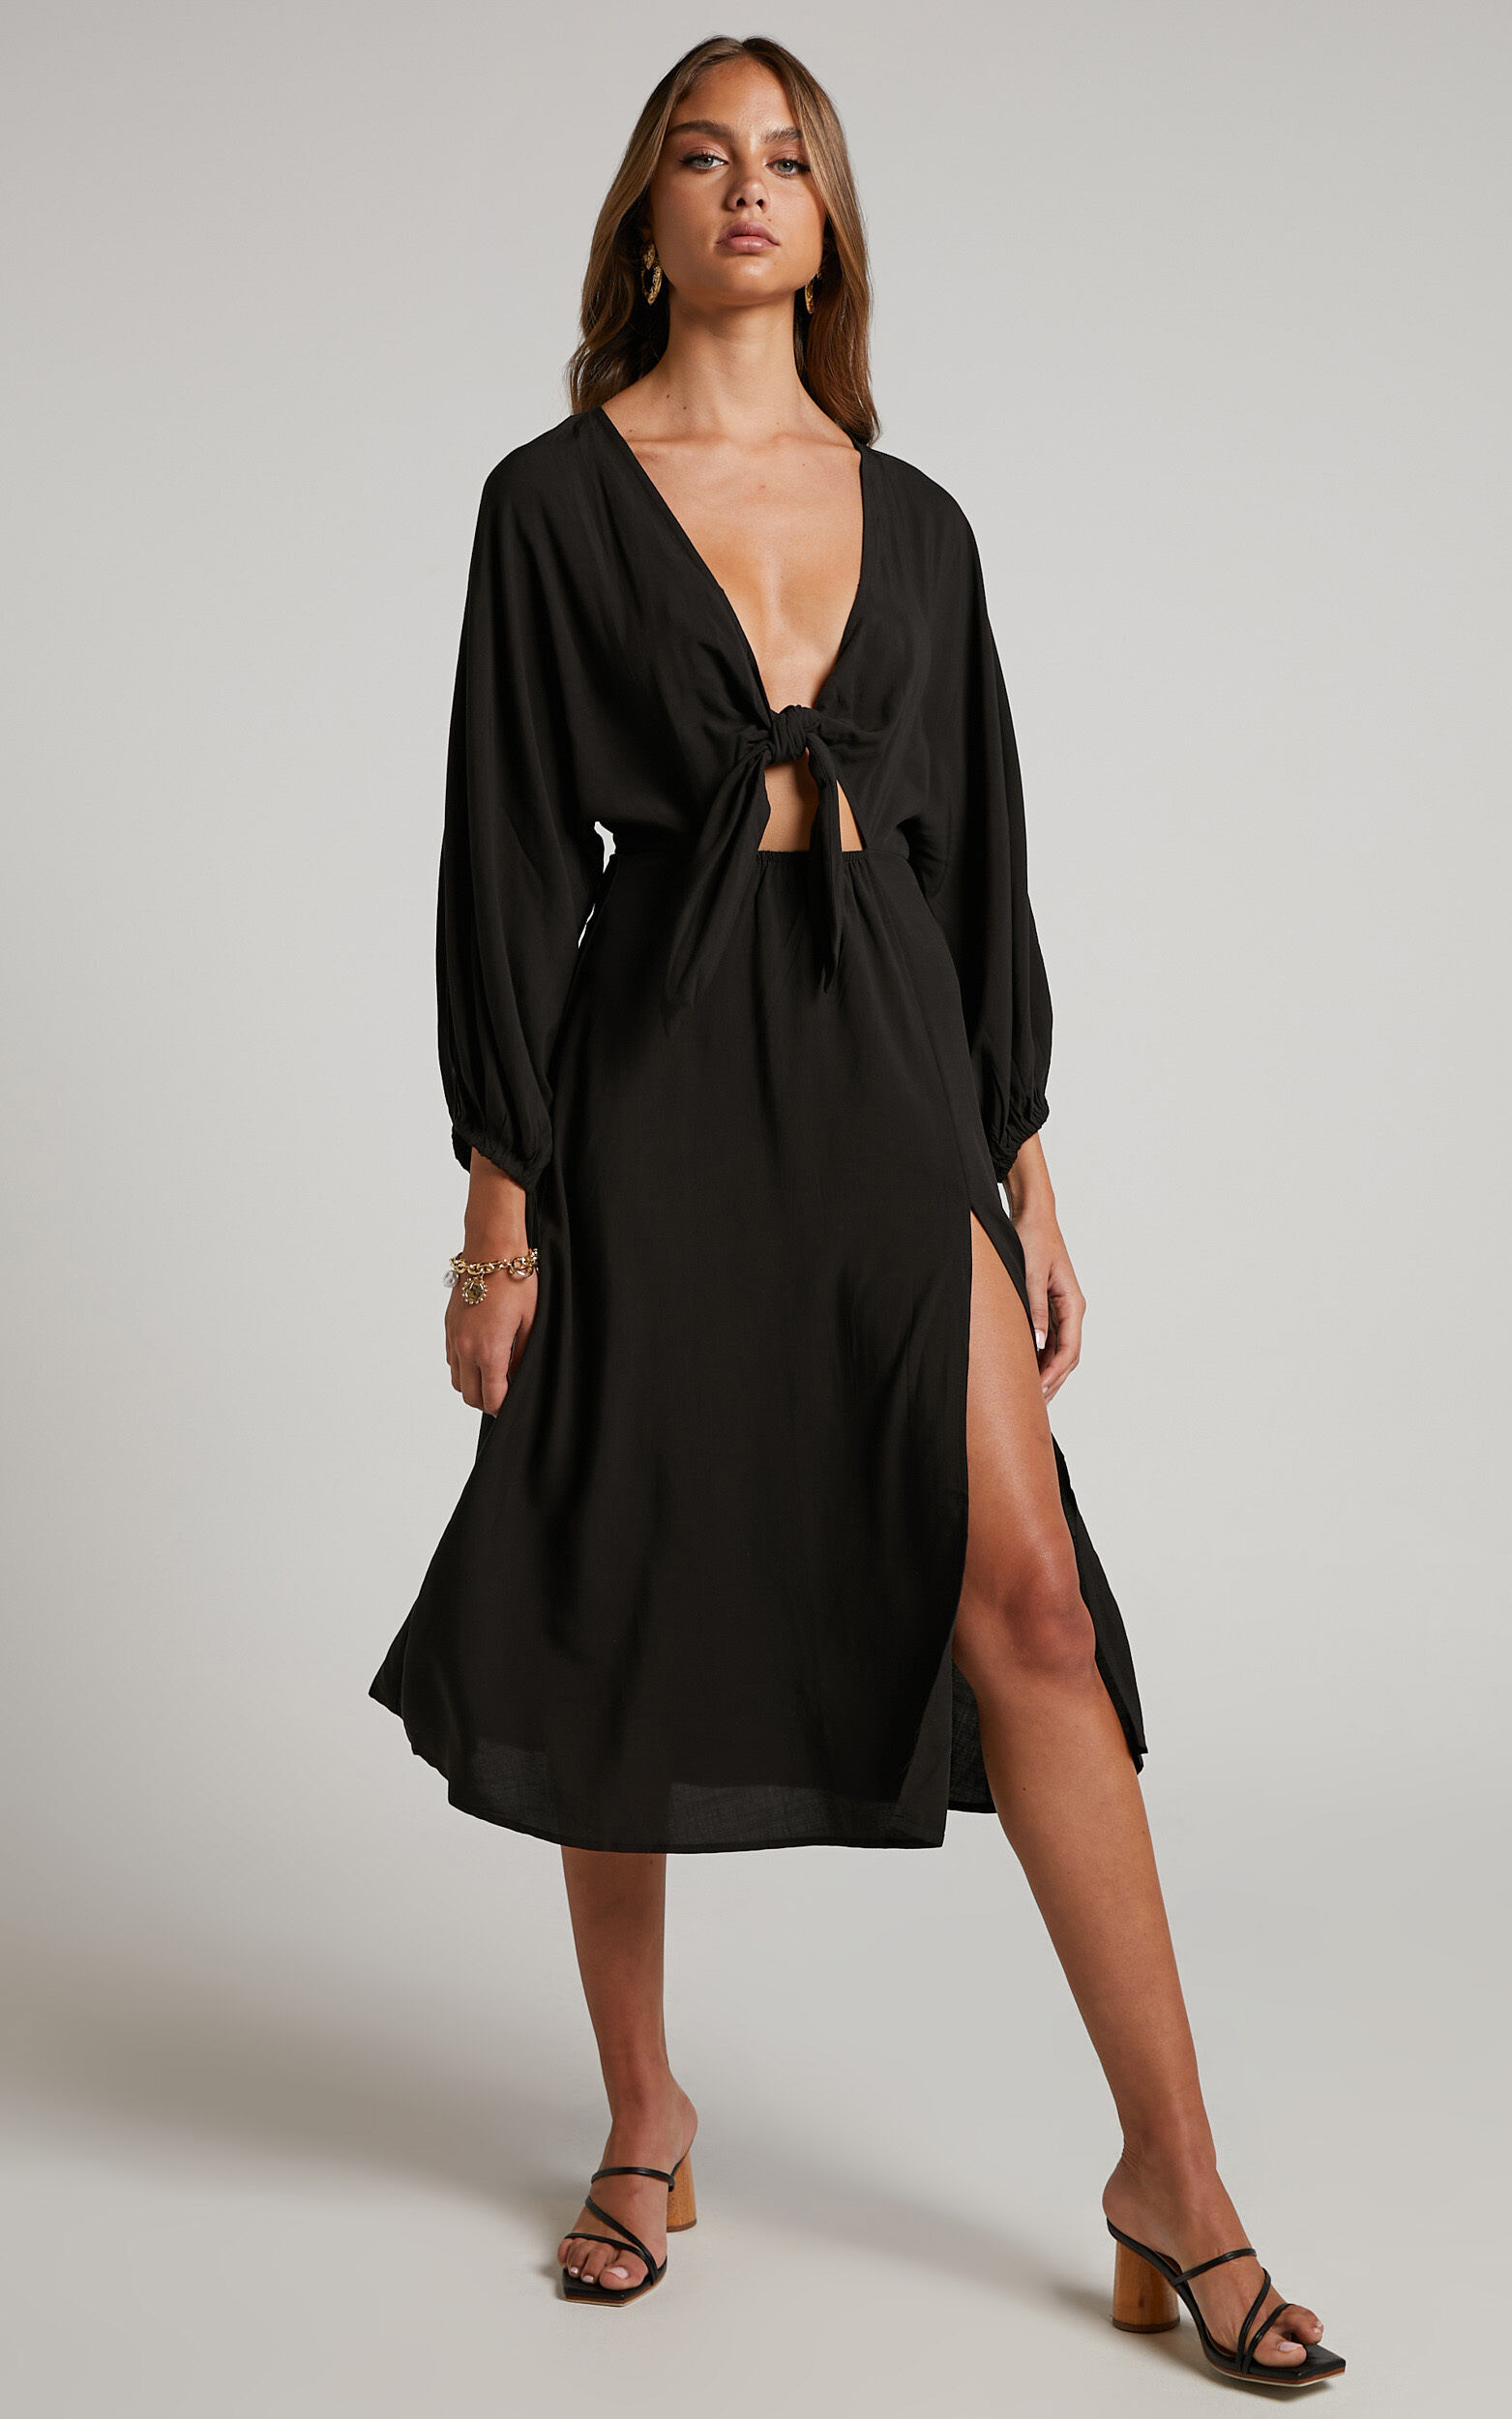 Tyricia Midi Dress - Long Sleeve Tie Front Cut Out Dress in Black - 04, BLK1